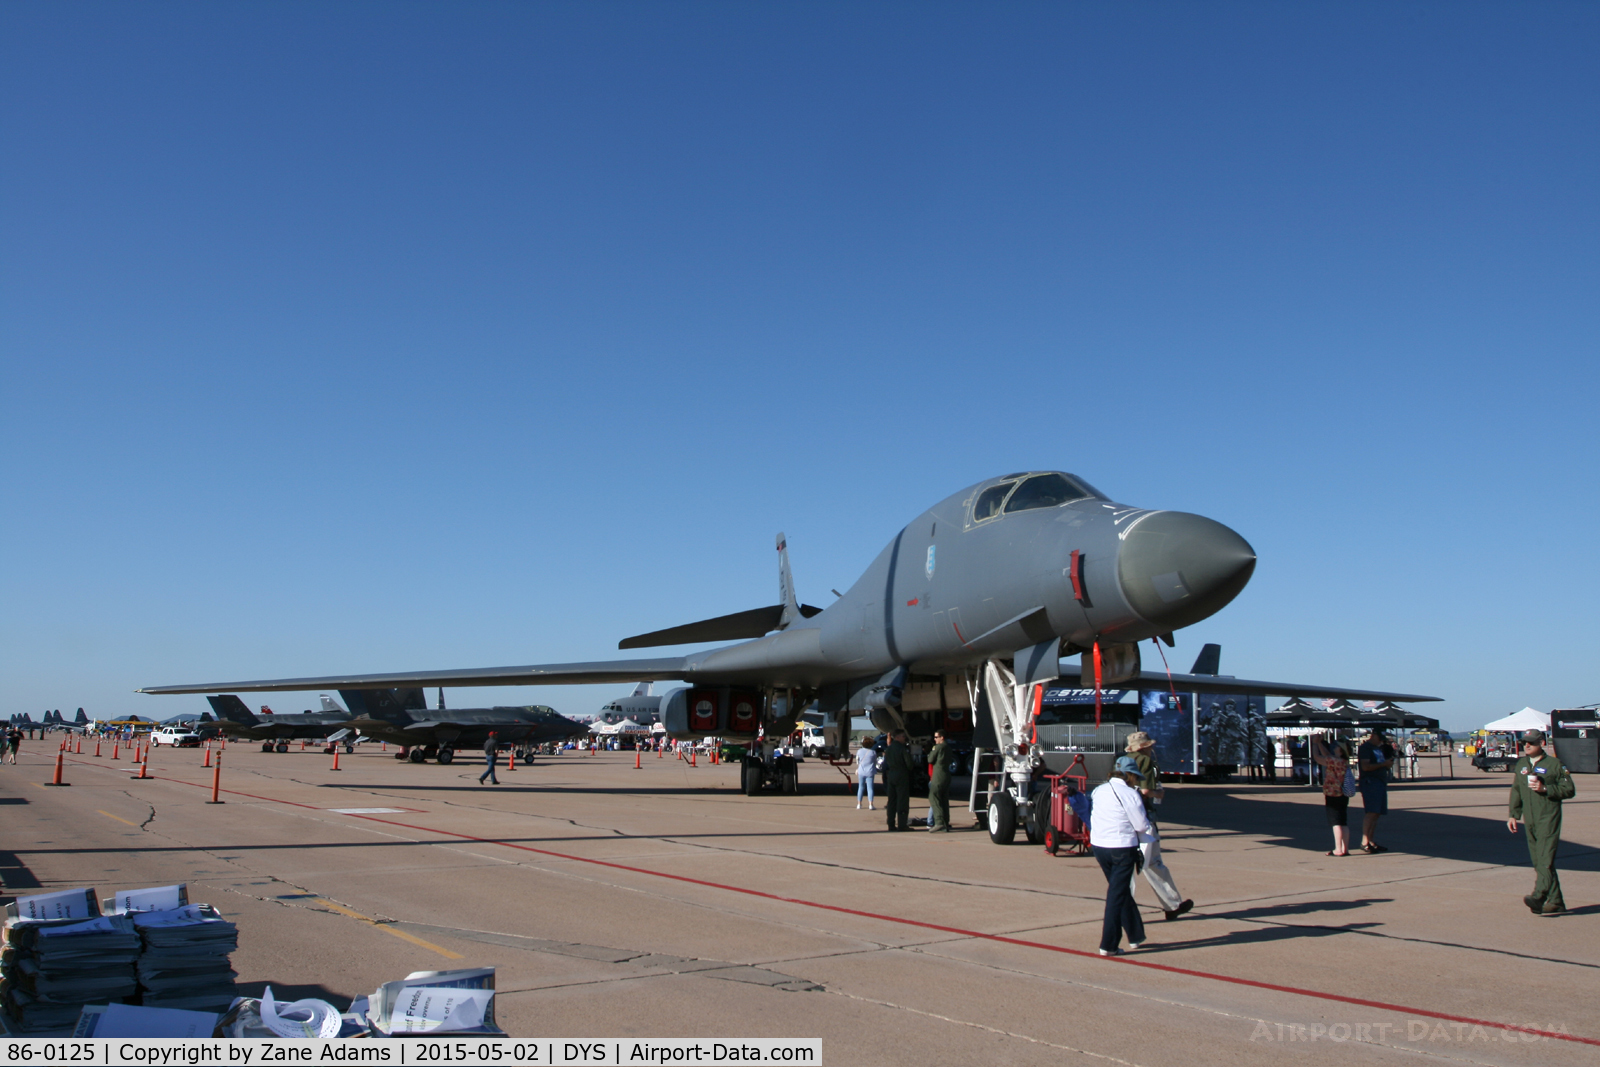 86-0125, 1986 Rockwell B-1B Lancer C/N 85, At the 2015 Big Country Airshow - Dyess AFB, Texas